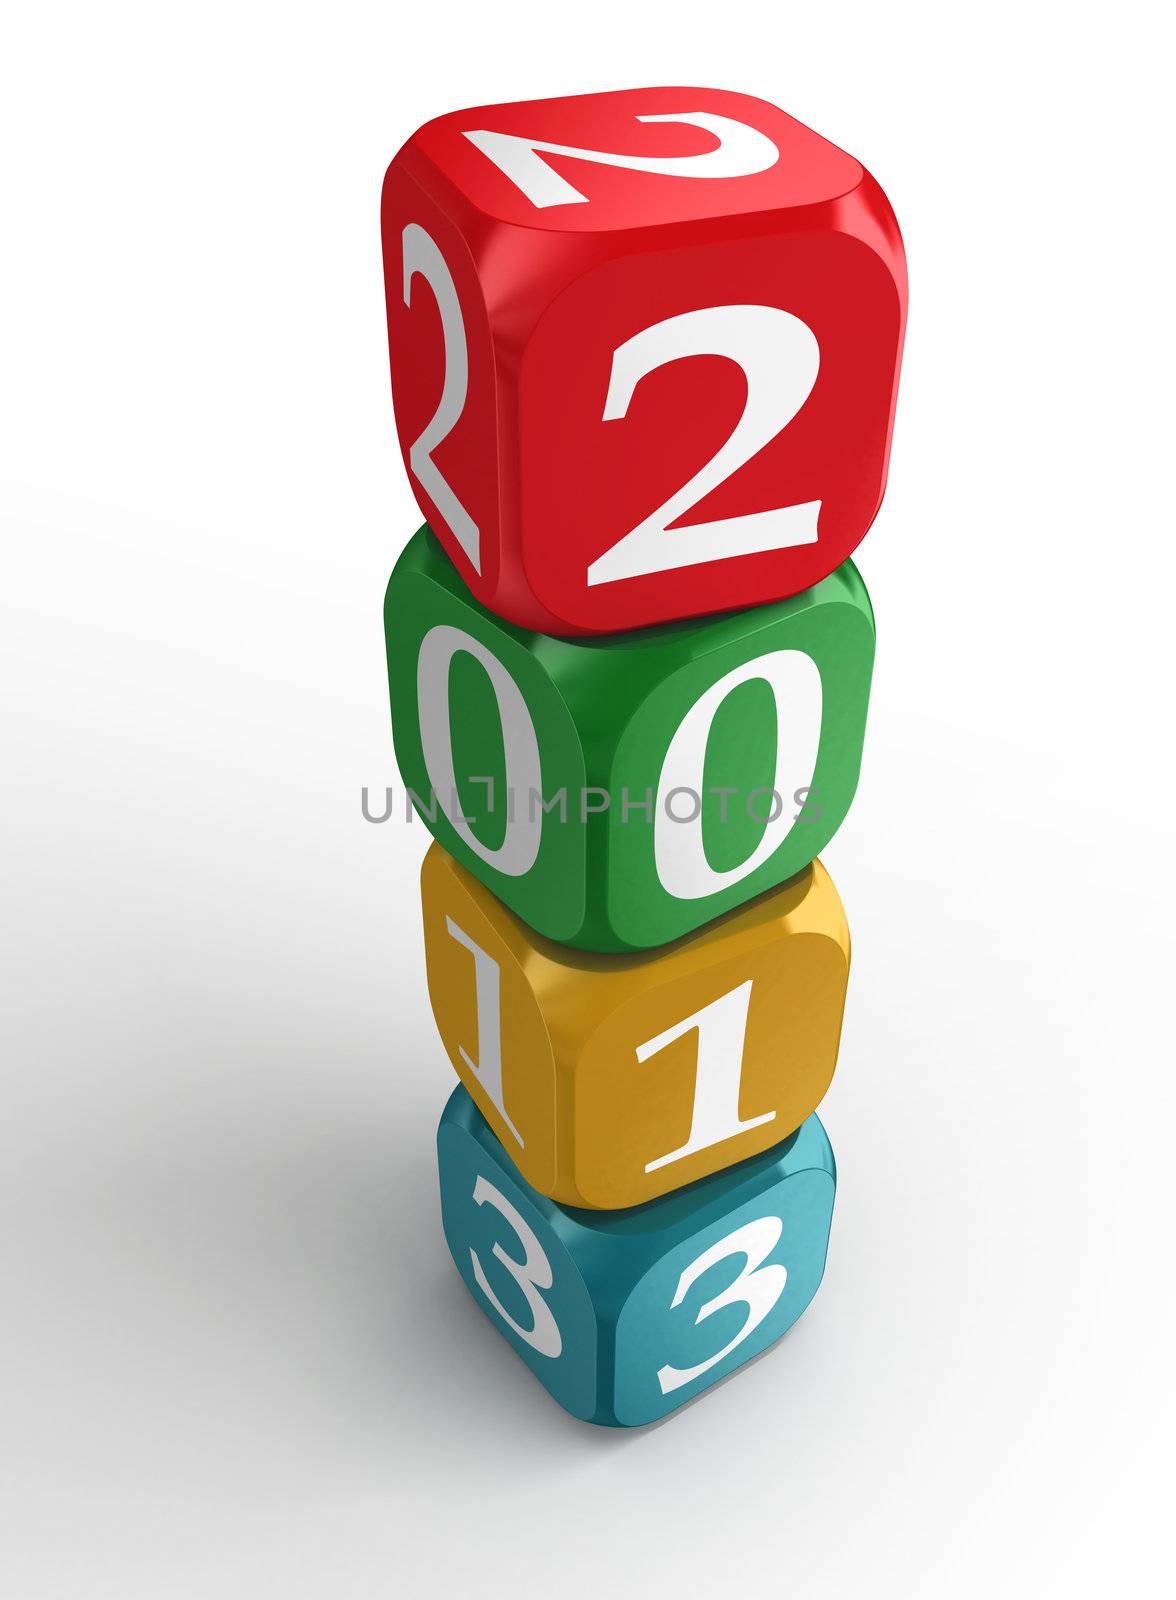 new year 2013 3d colorful dice tower on white background.clipping path included